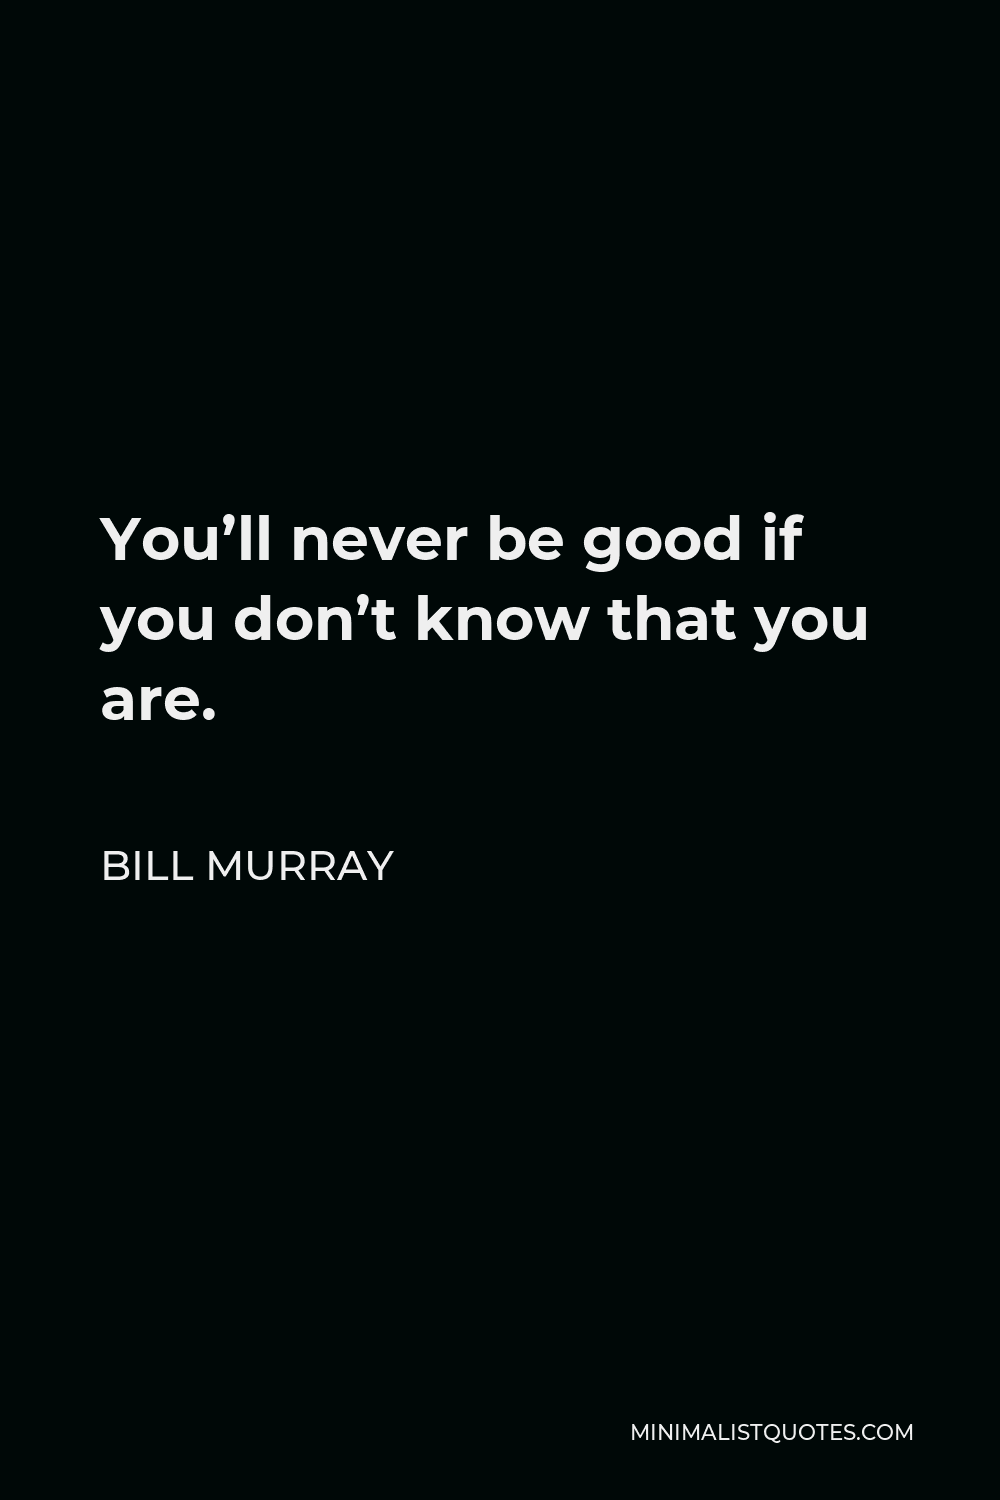 Bill Murray Quote - You’ll never be good if you don’t know that you are.